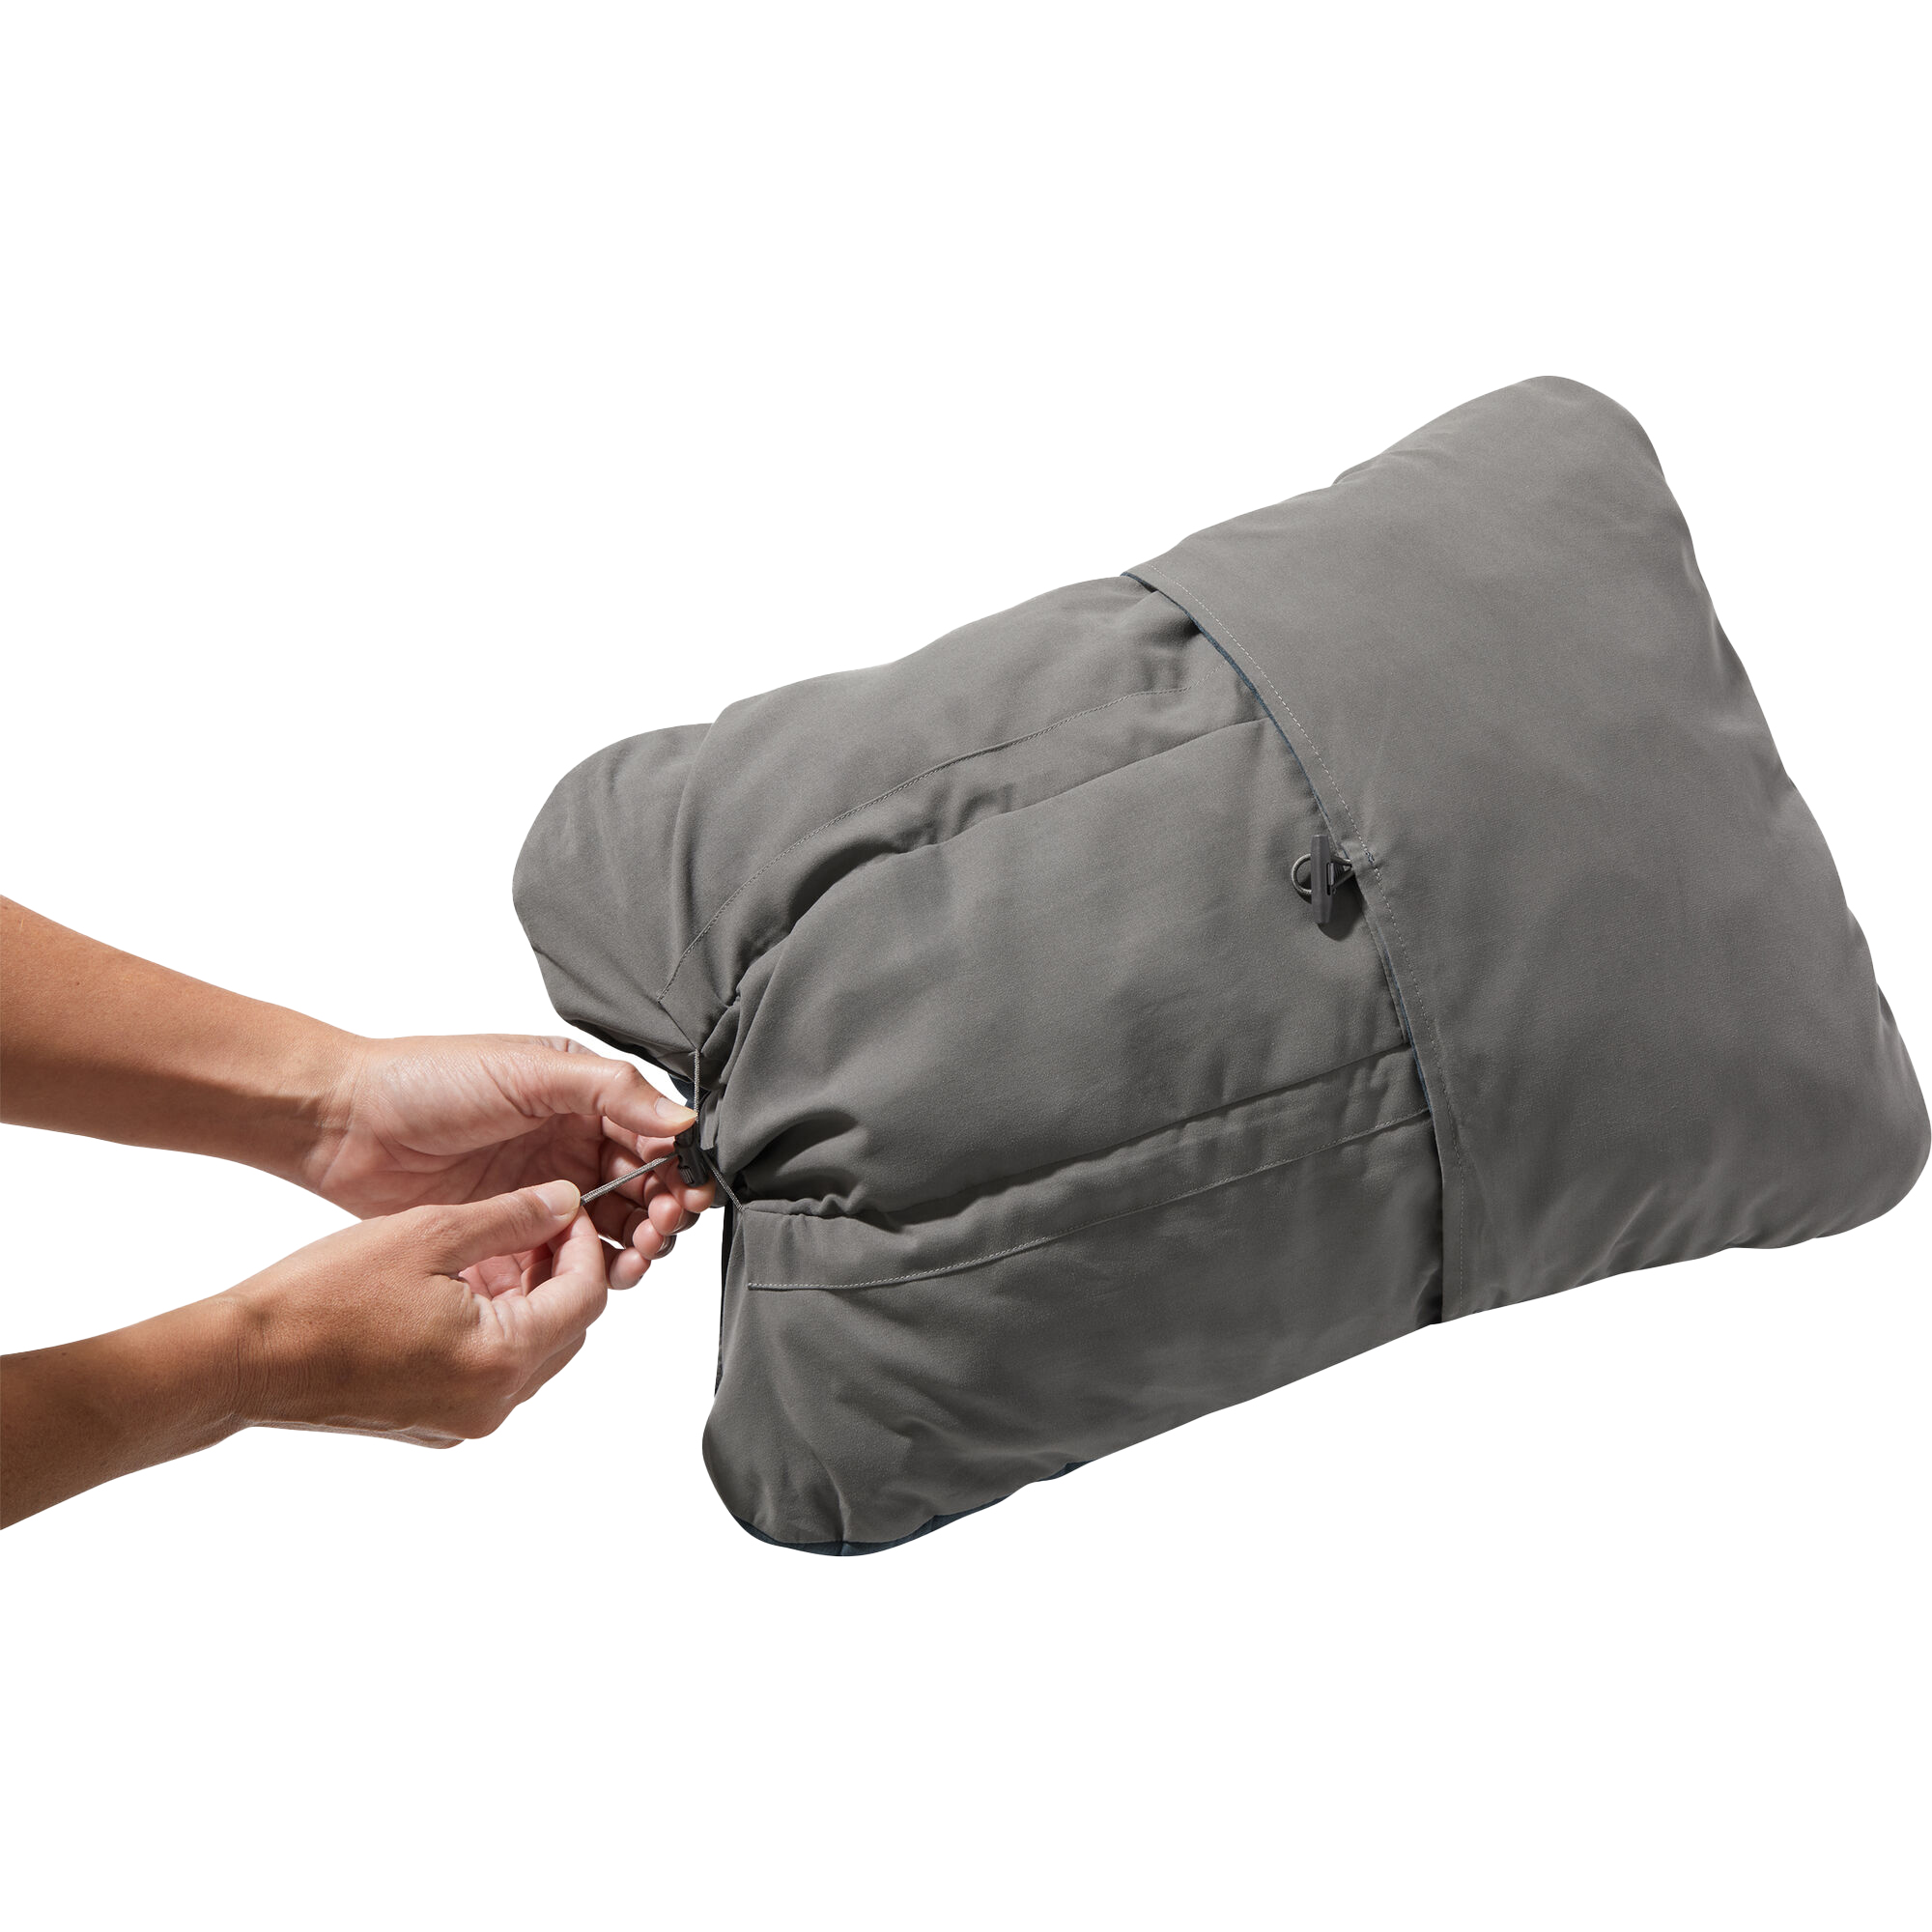 ThermaRest Compressible Pillow Cinch Camping Pillow